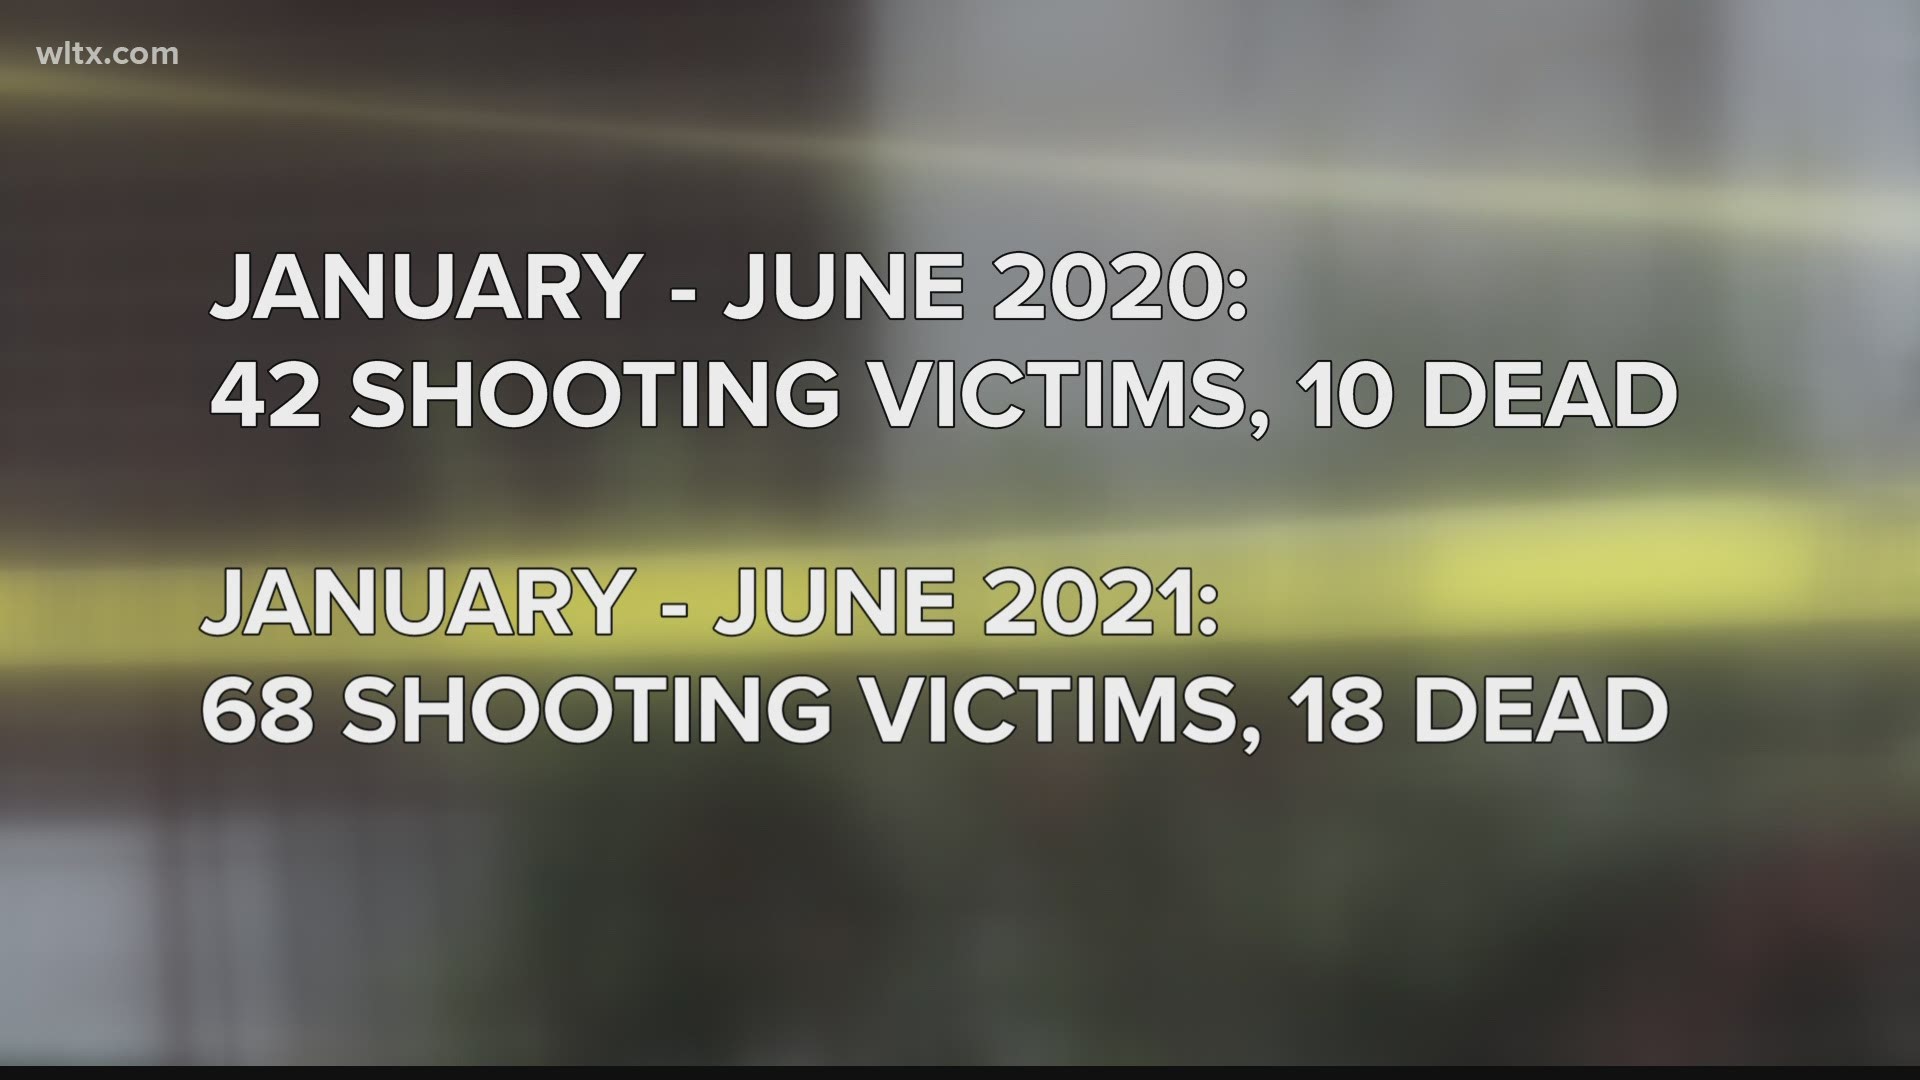 Last year the Palmetto State saw a huge increase in violent crime and 2021 is on track to be even deadlier.